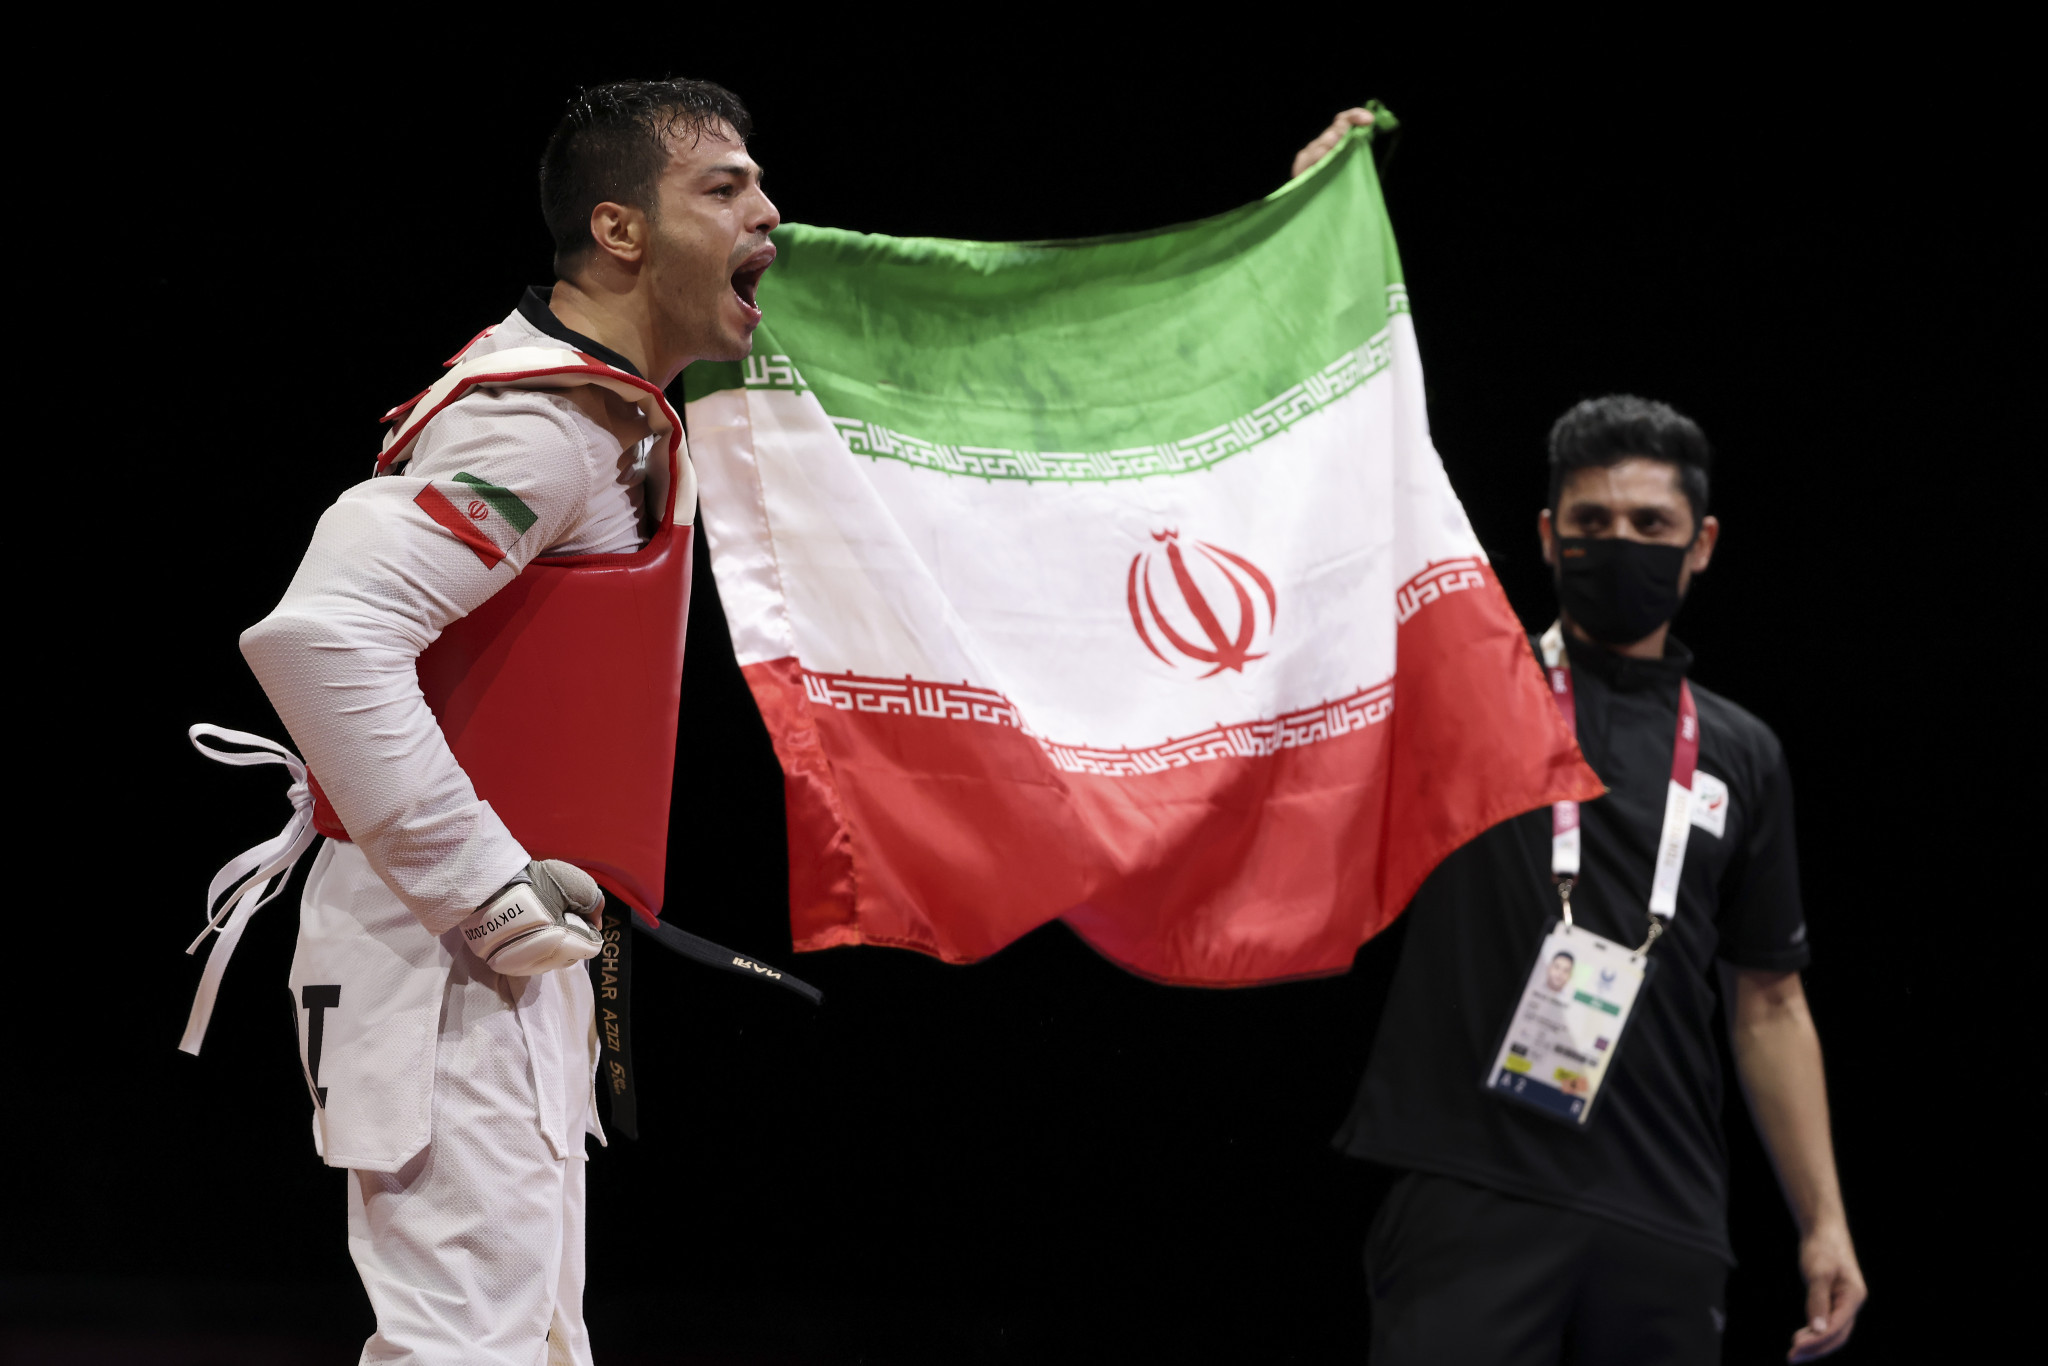 Ivan Mikulić lost to two different Iranians in major finals in 2021, including Asghar Aziziaghdam in the Paralympic gold medal bout  ©Getty Images